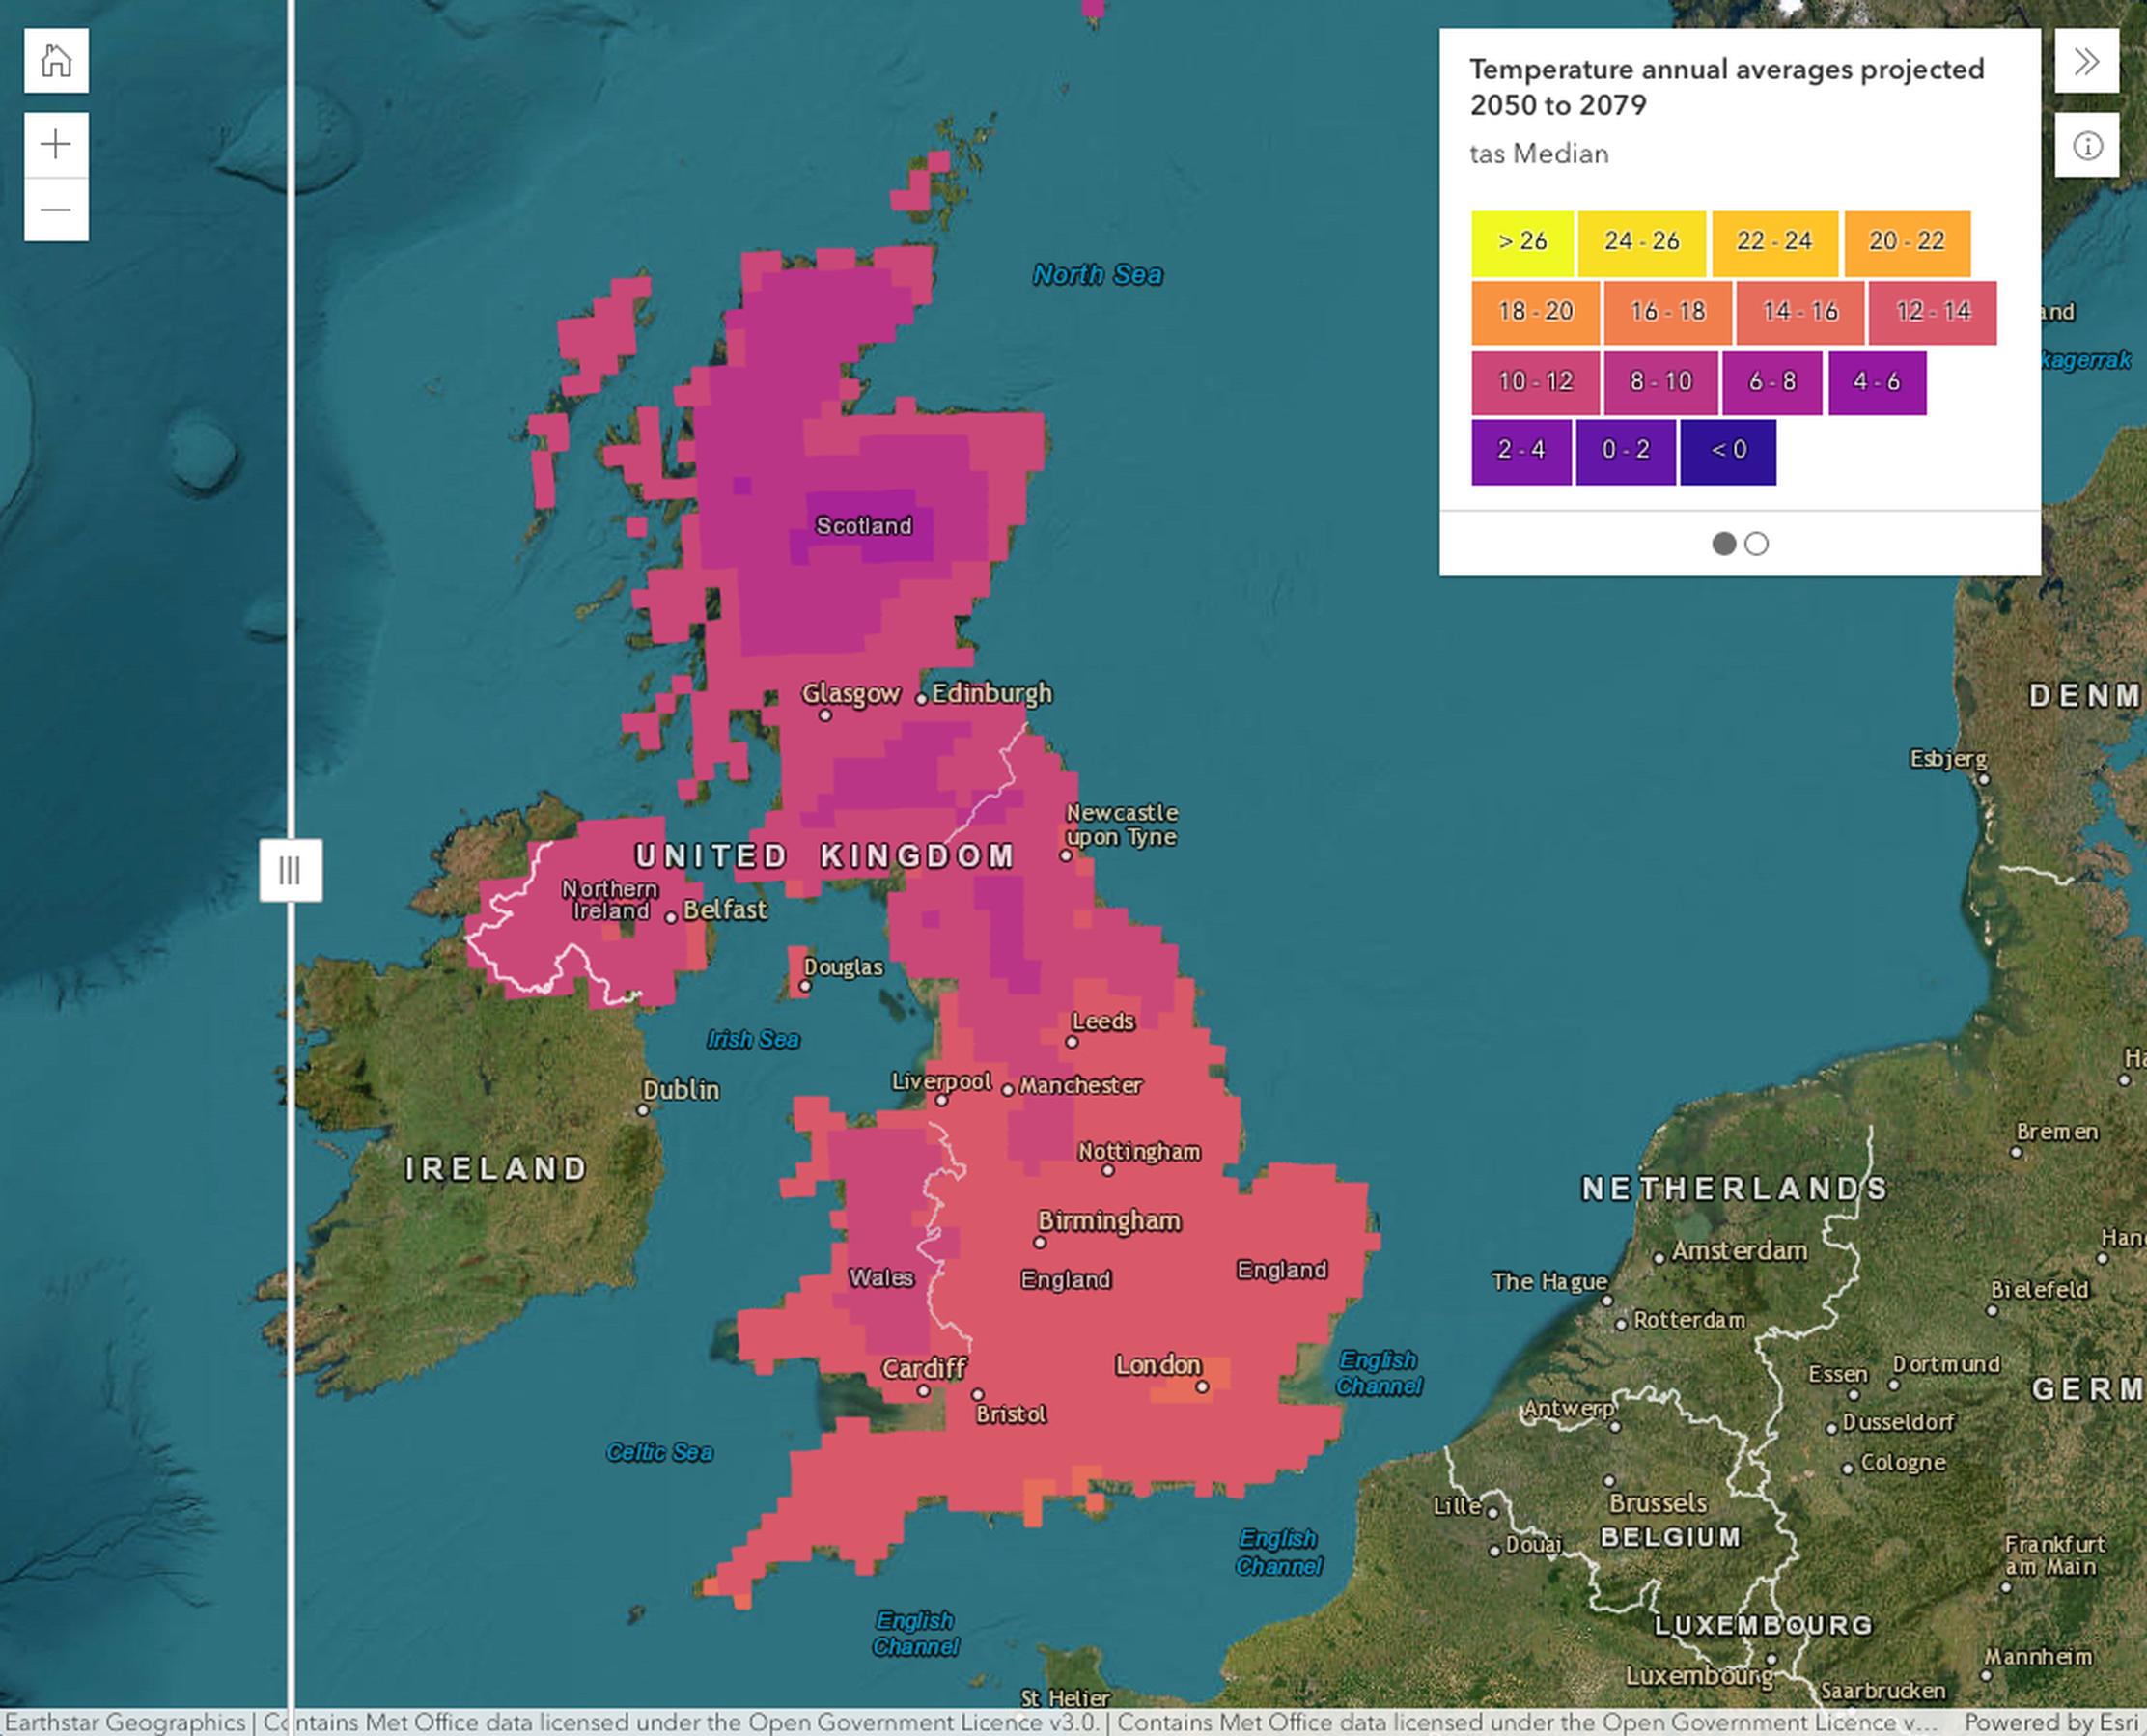 Met Office launches Climate Data Portal